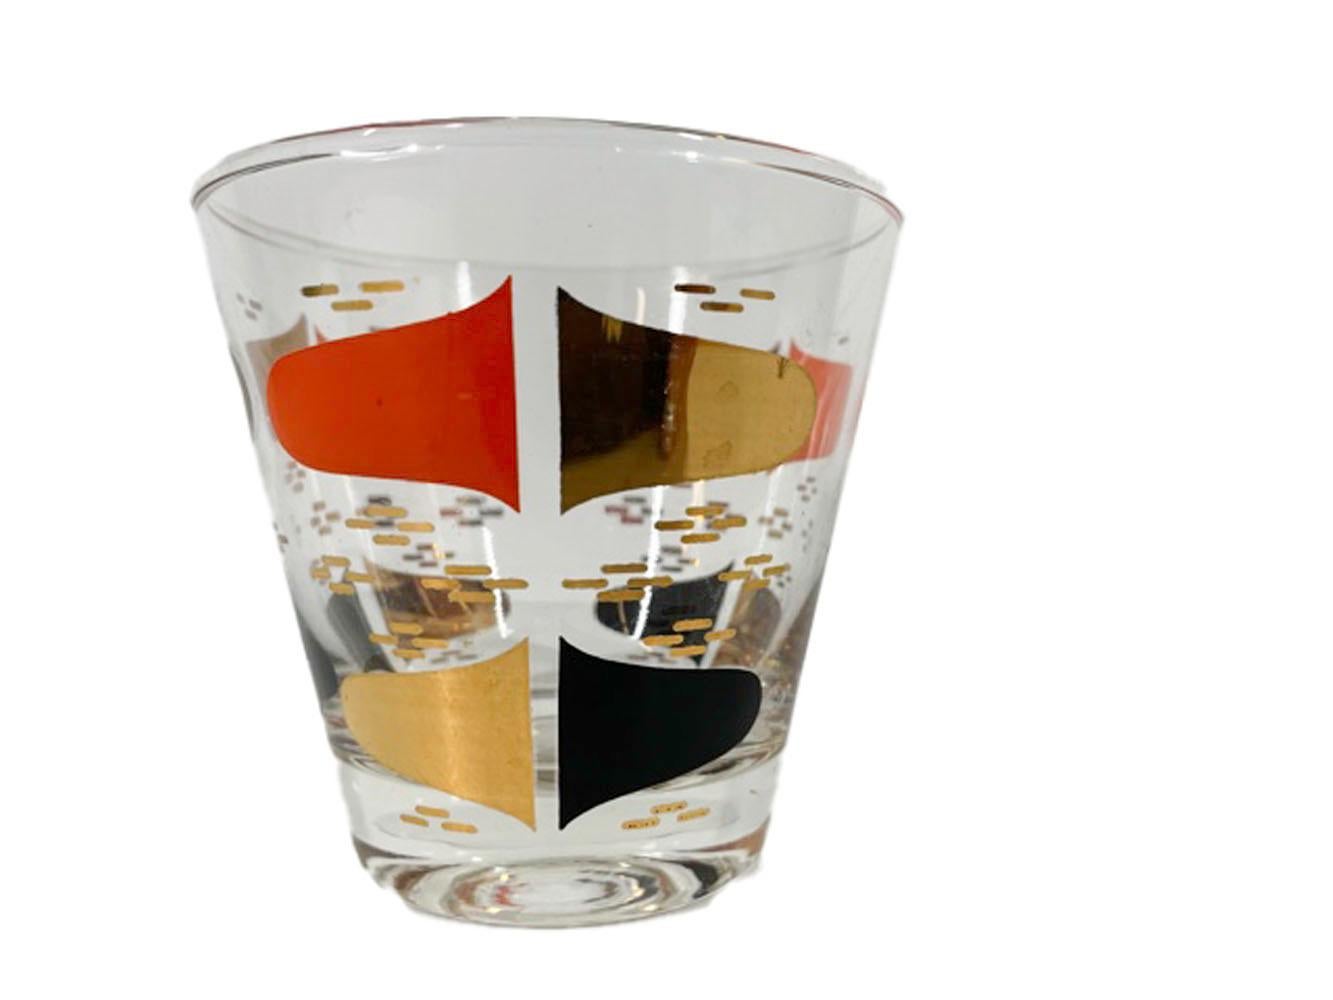 Set of 4 Atomic period old fashioned glasses with split black, orange and gold ellipses among a background of gold dashes on clear glass.